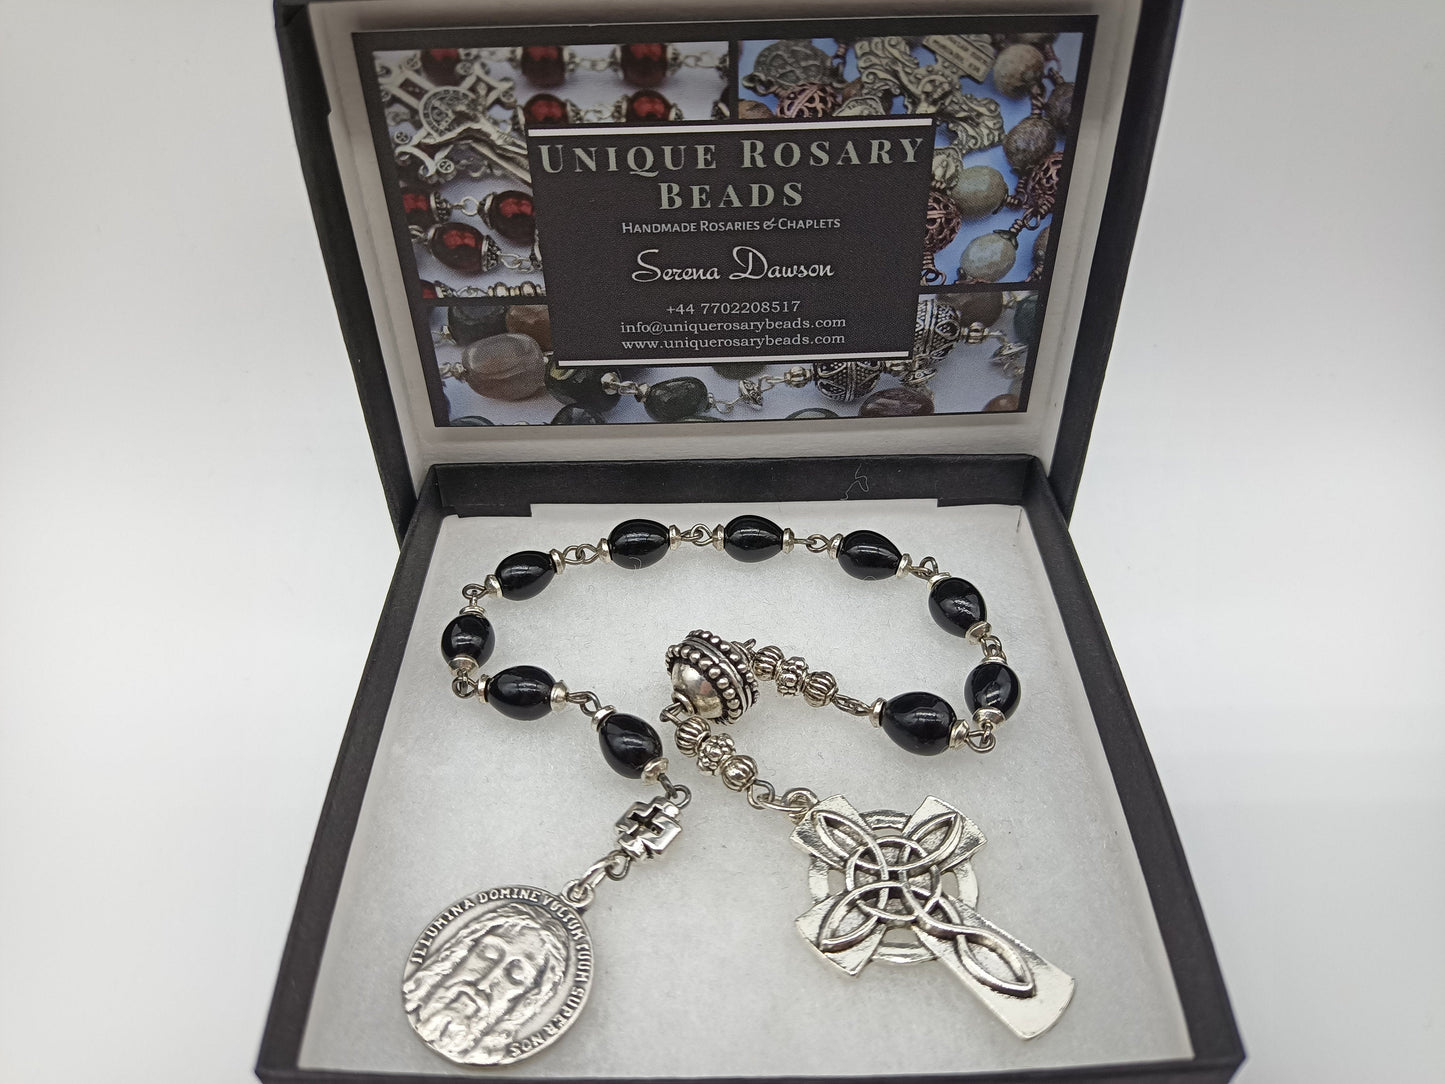 Holy Face of Jesus single Rosary decade, Holy Face tenner beads, Shroud of Turin prayer beads, Veronica's Veil Rosary beads, prayer beads..